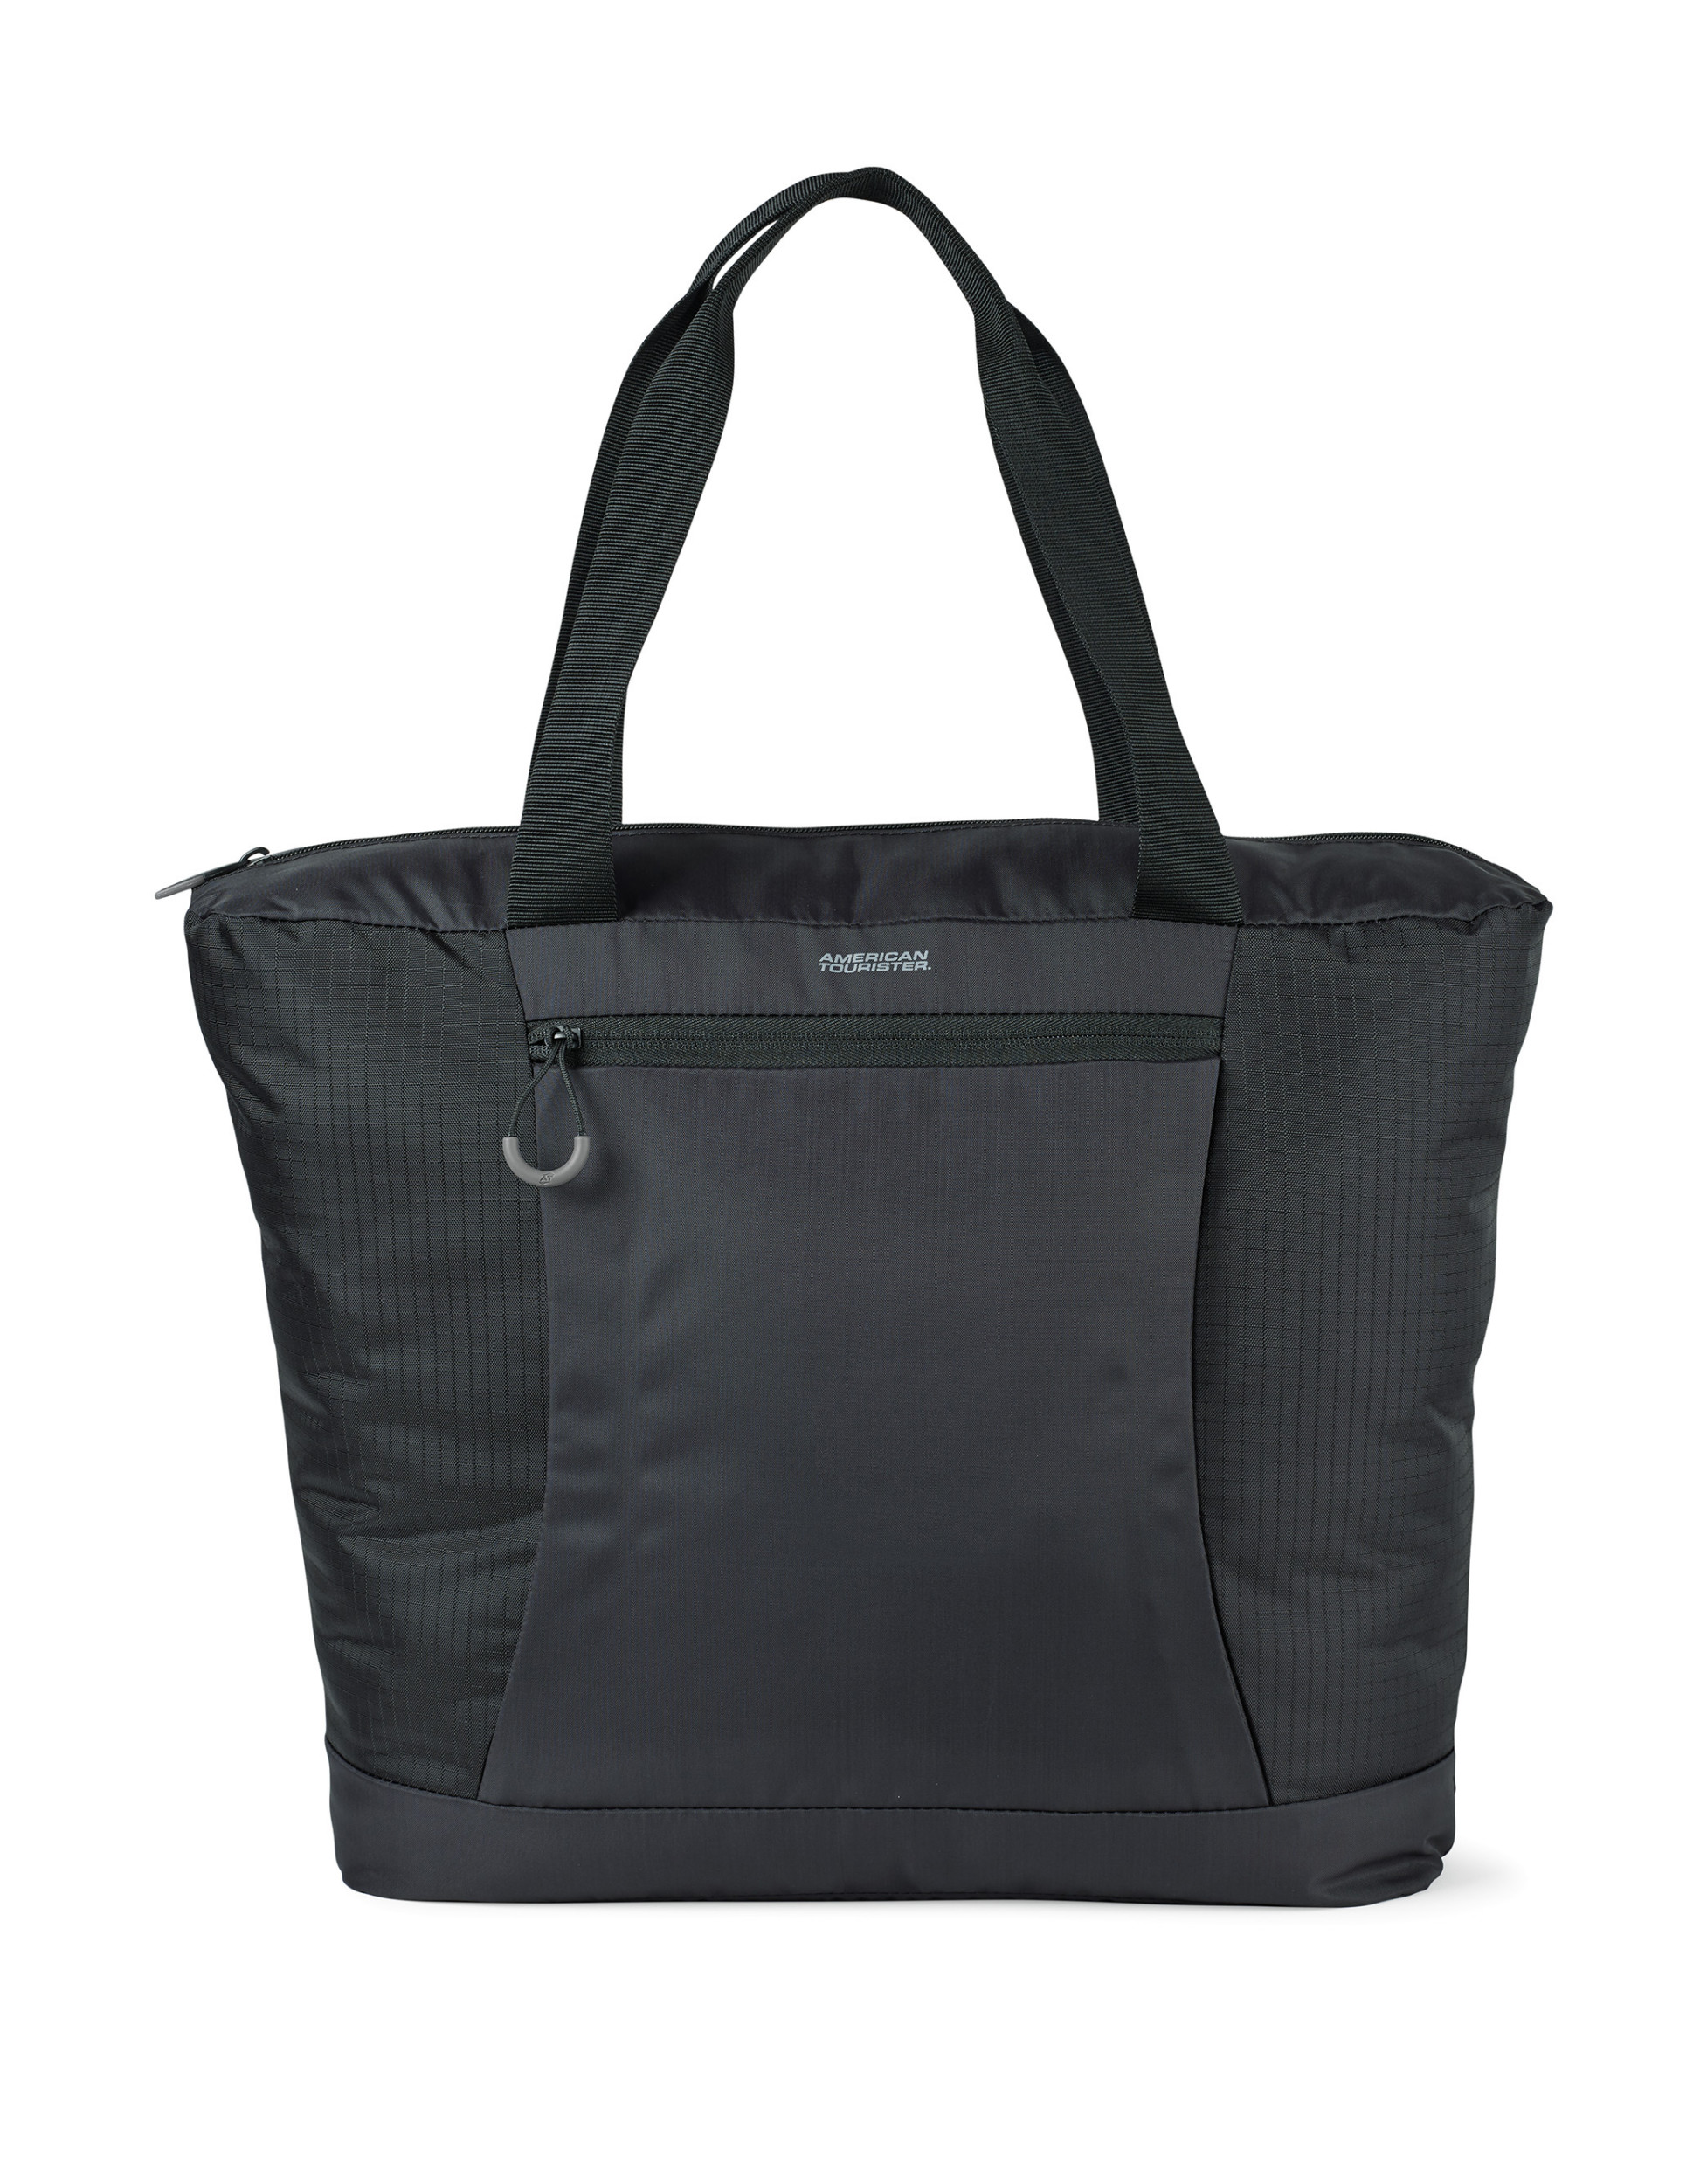 American Tourister 96040 - Voyager Packable Tote